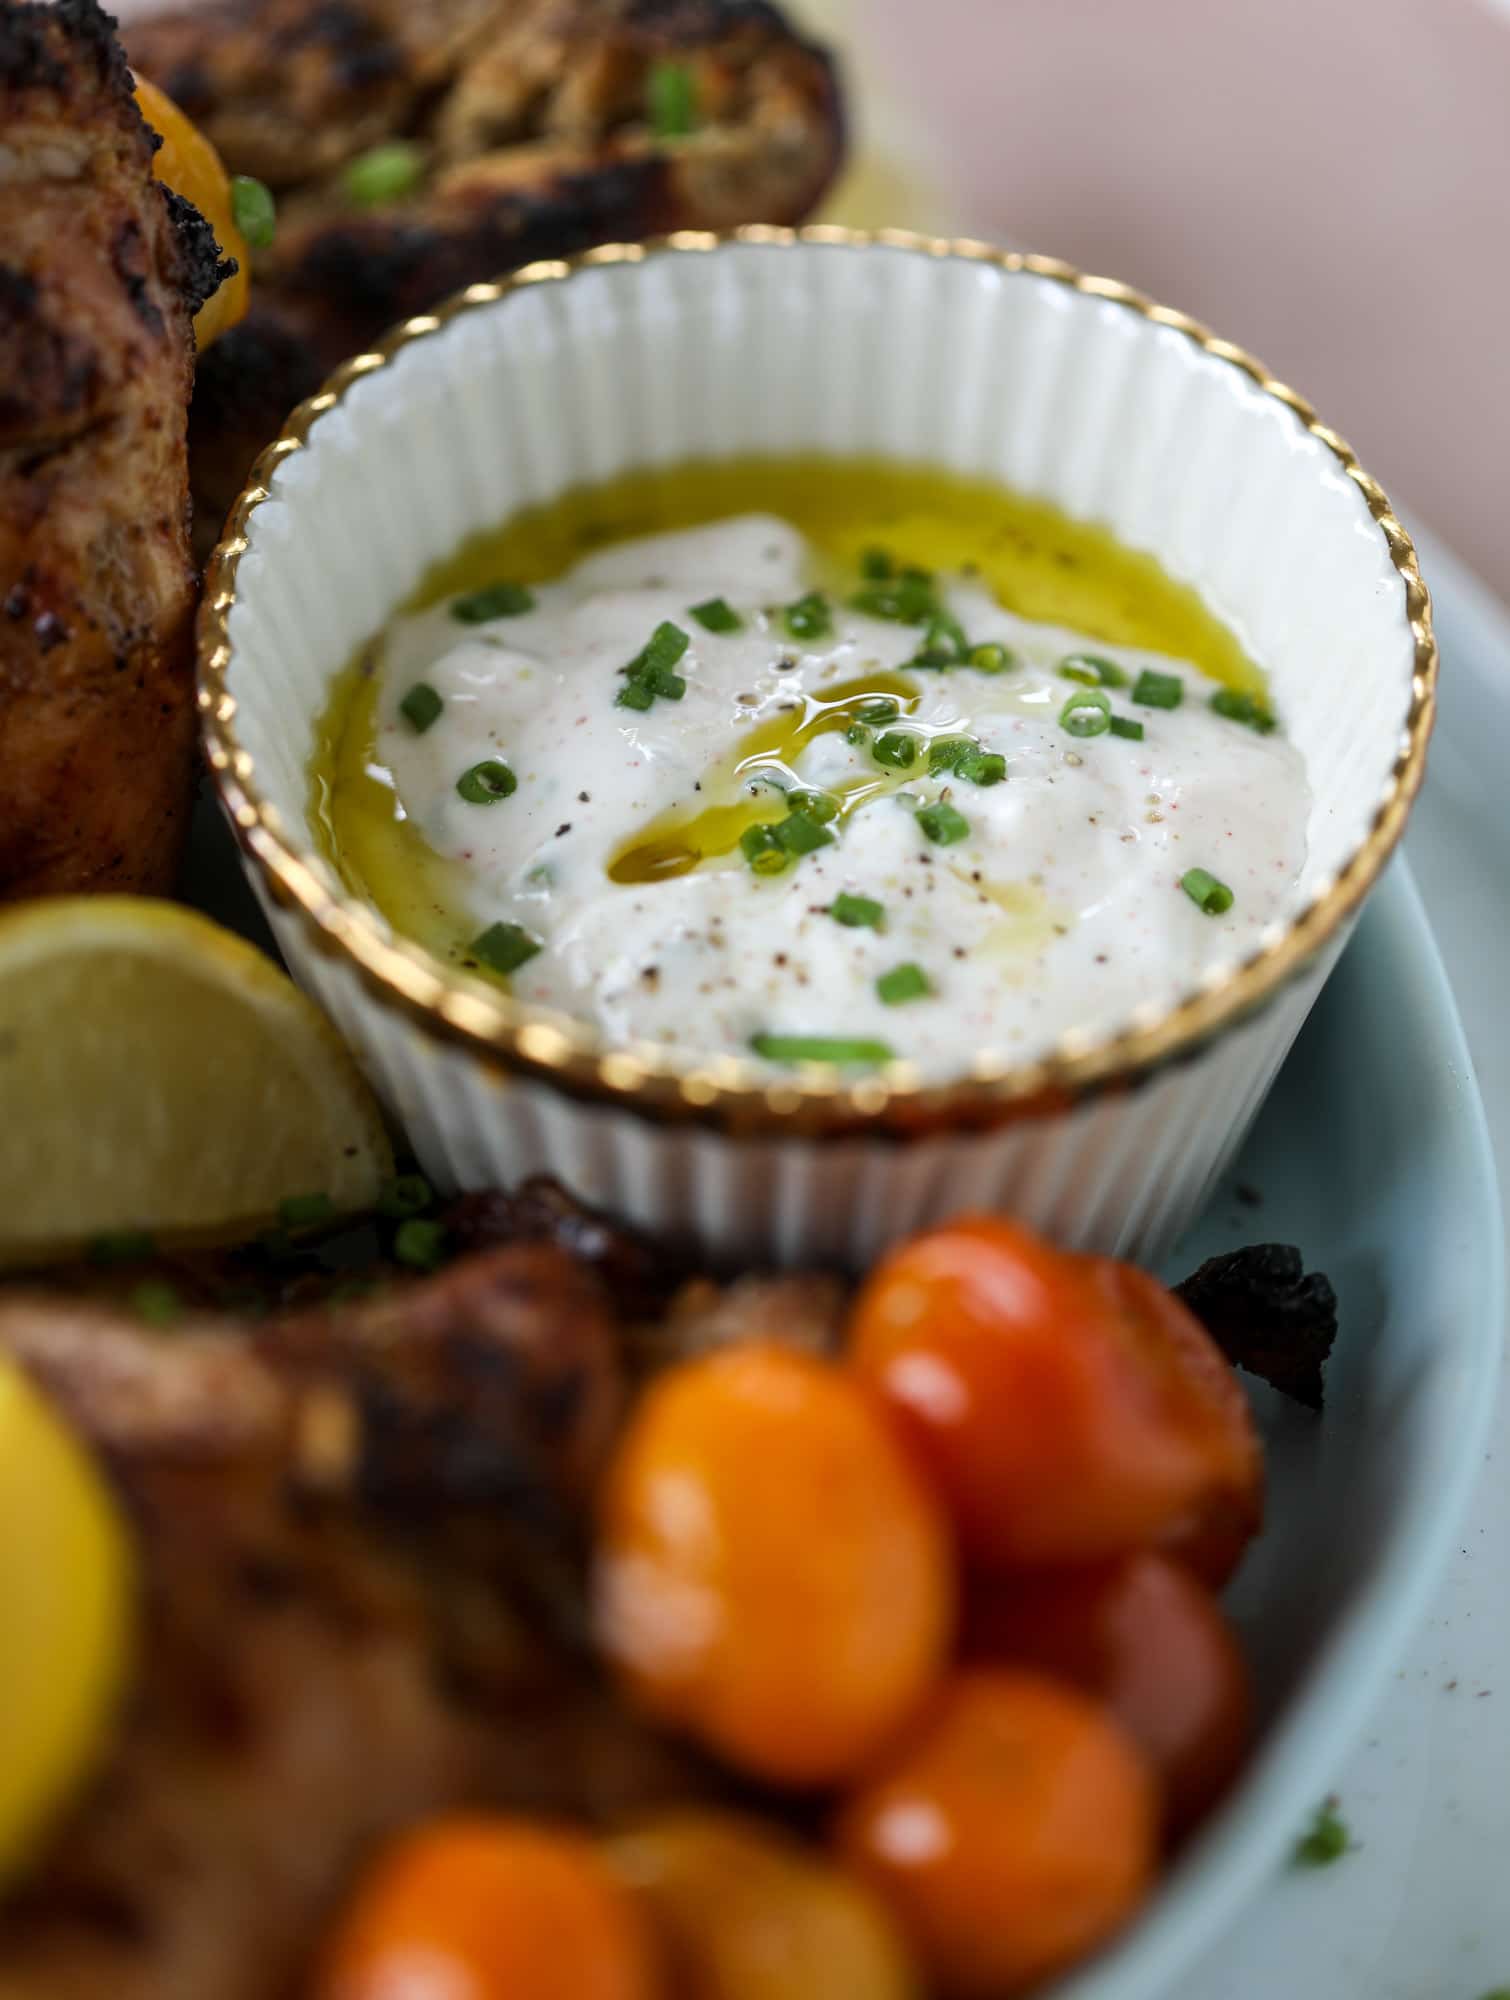 This yogurt marinated chicken recipe is super flavorful, tender, juicy and delicious. The fresh lemon adds a kick of flavor and it